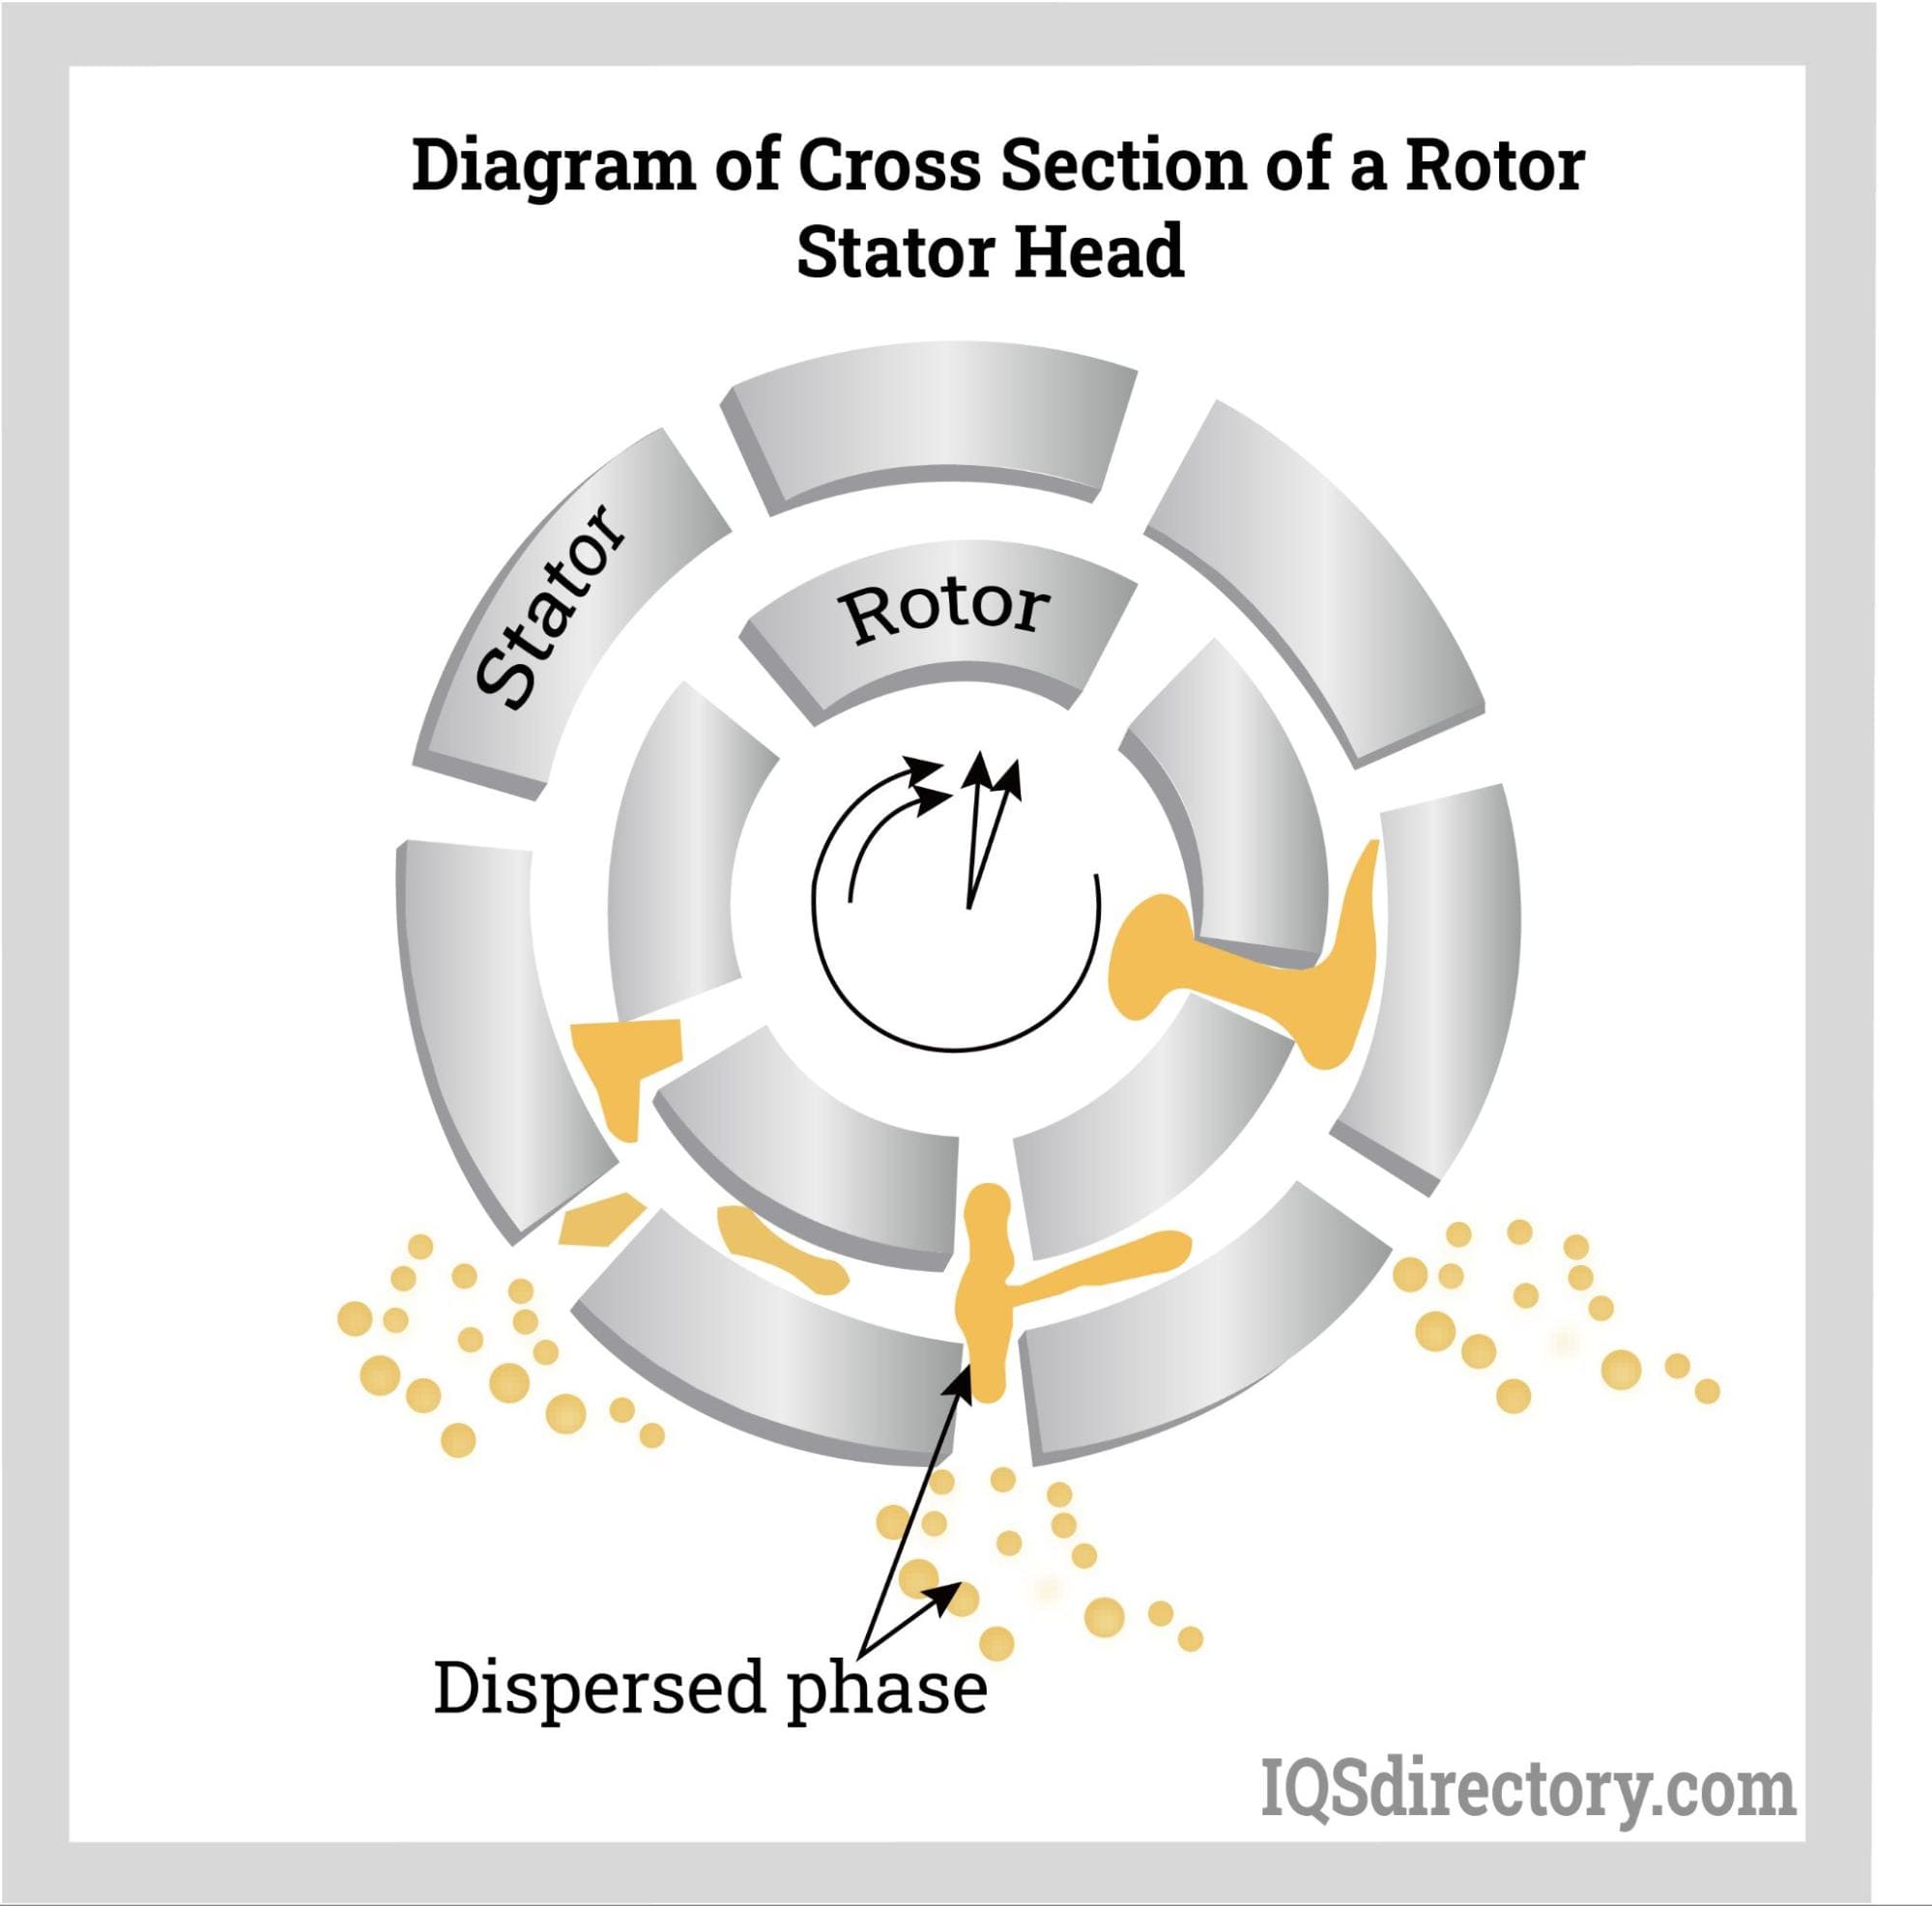 Diagram of Cross Section of a Rotor Stator Head